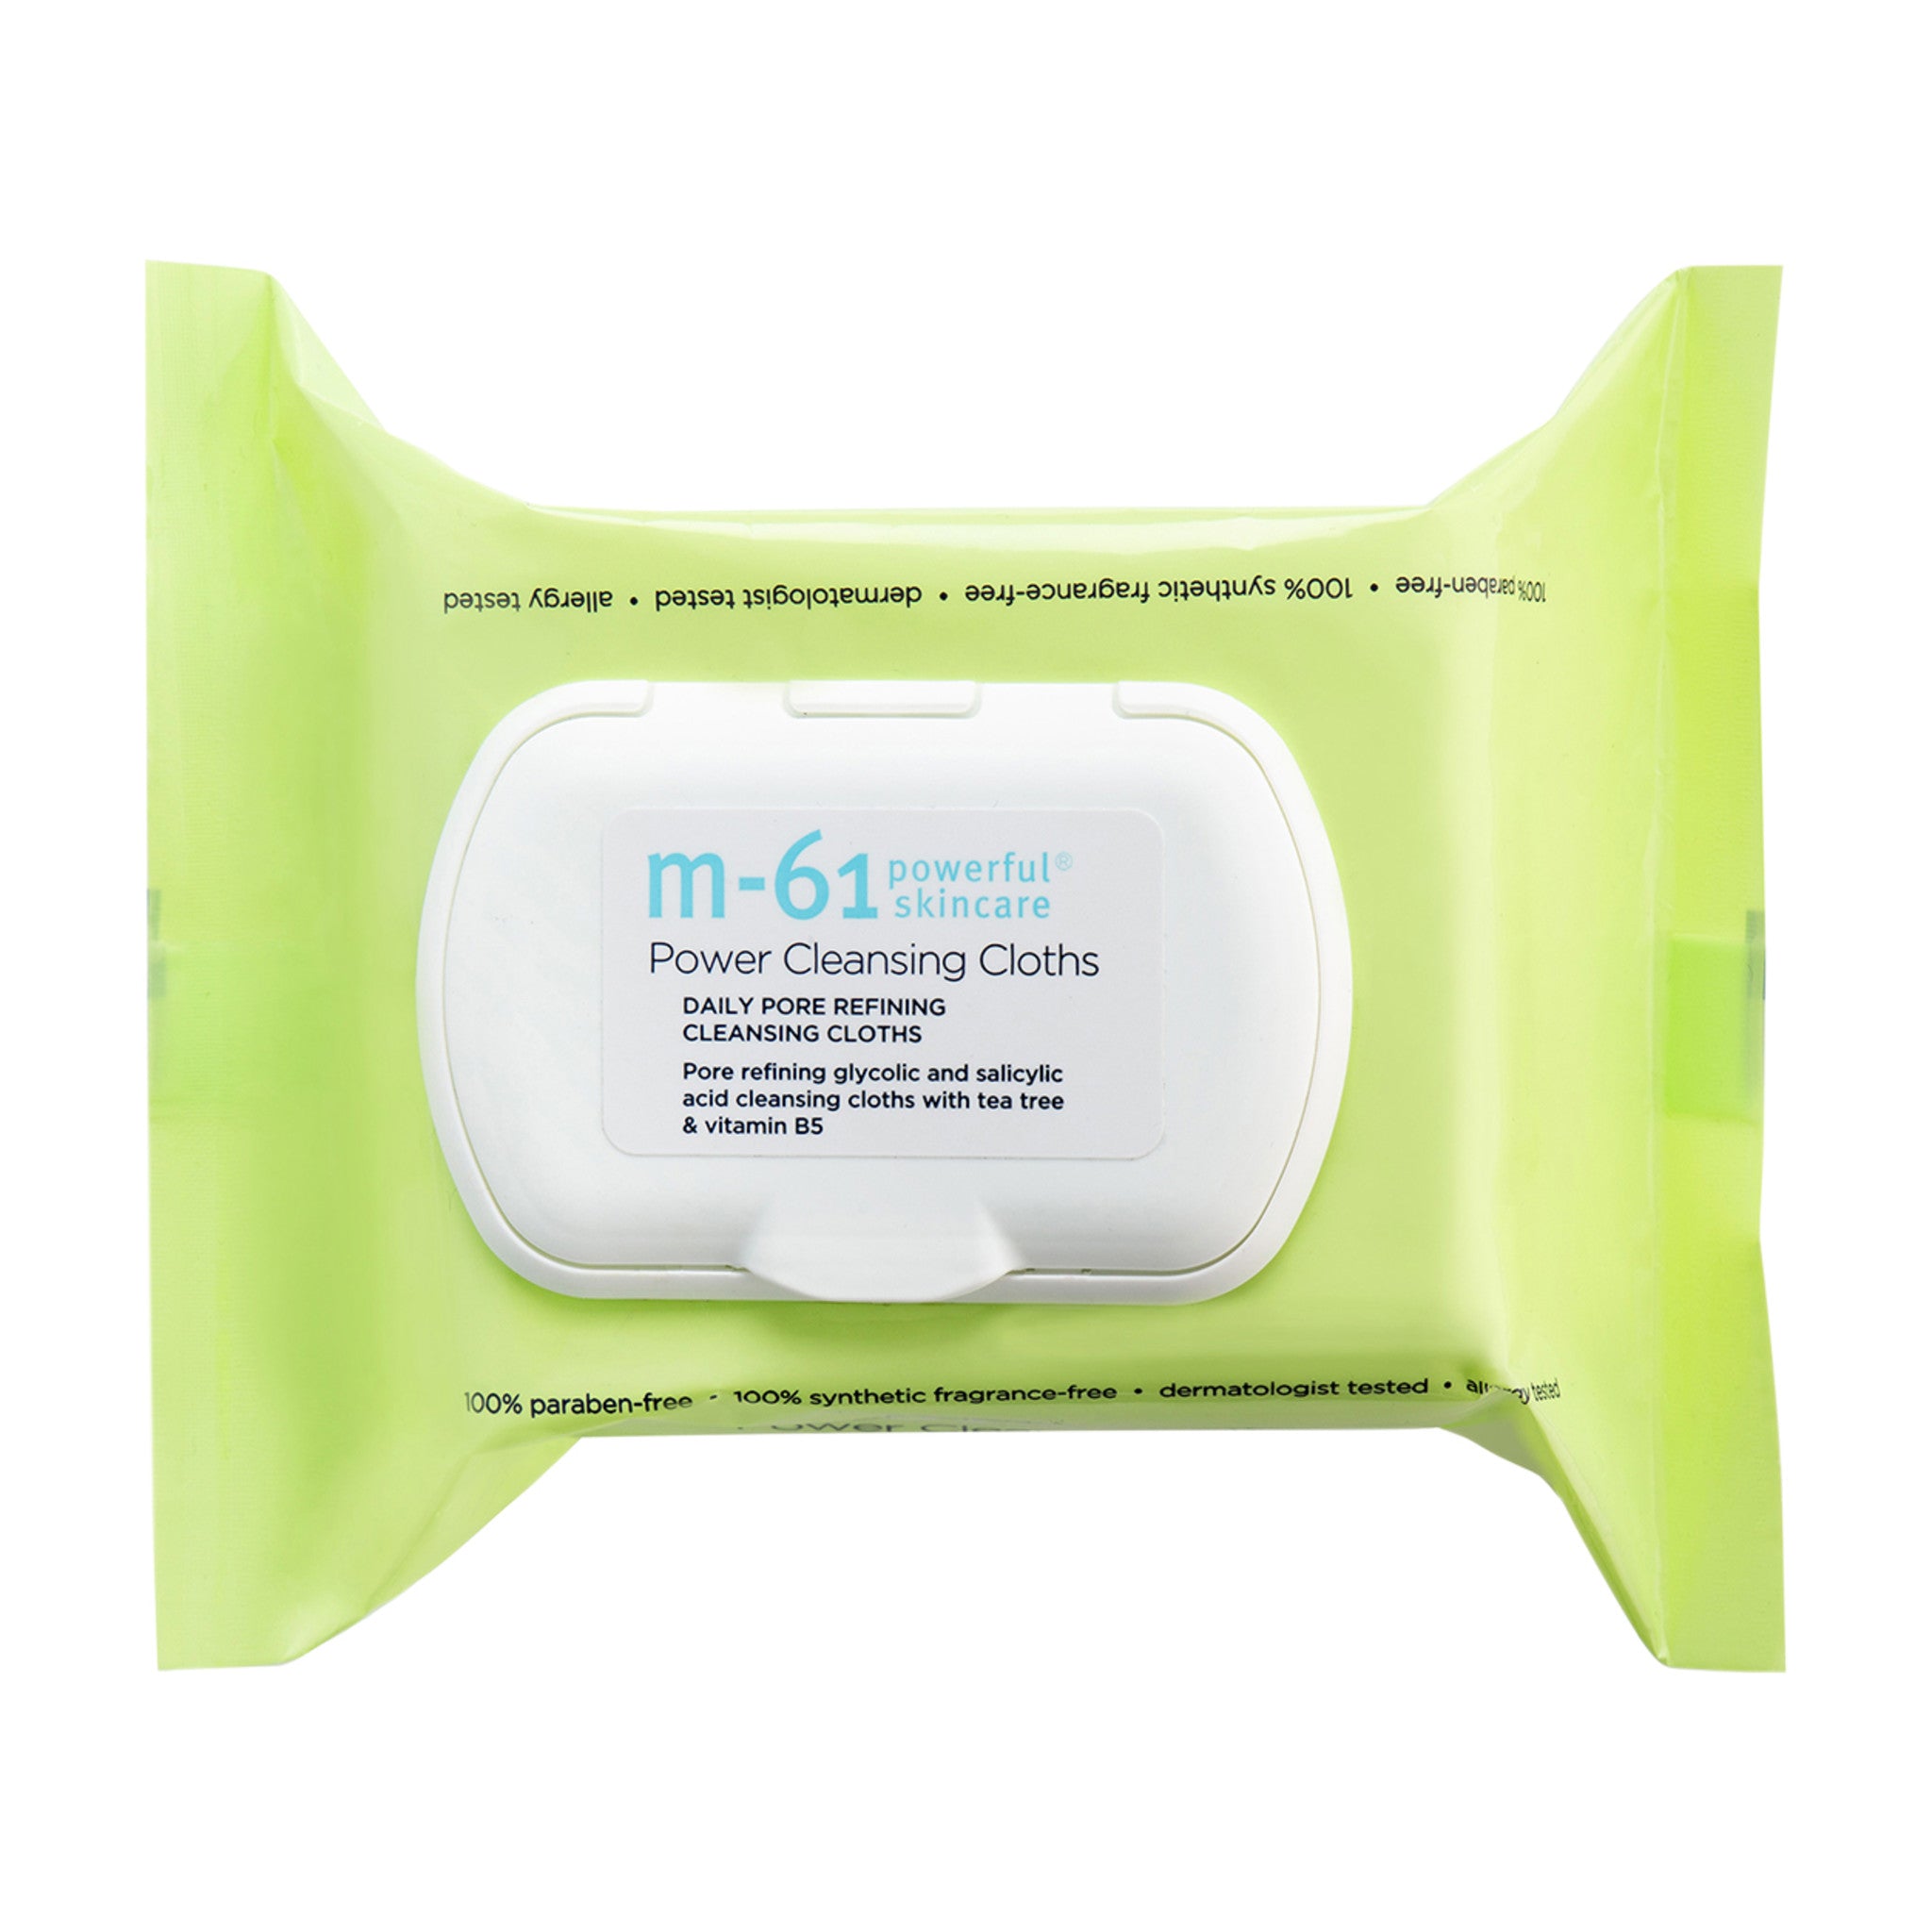 M-61 Power Cleansing Cloths main image.